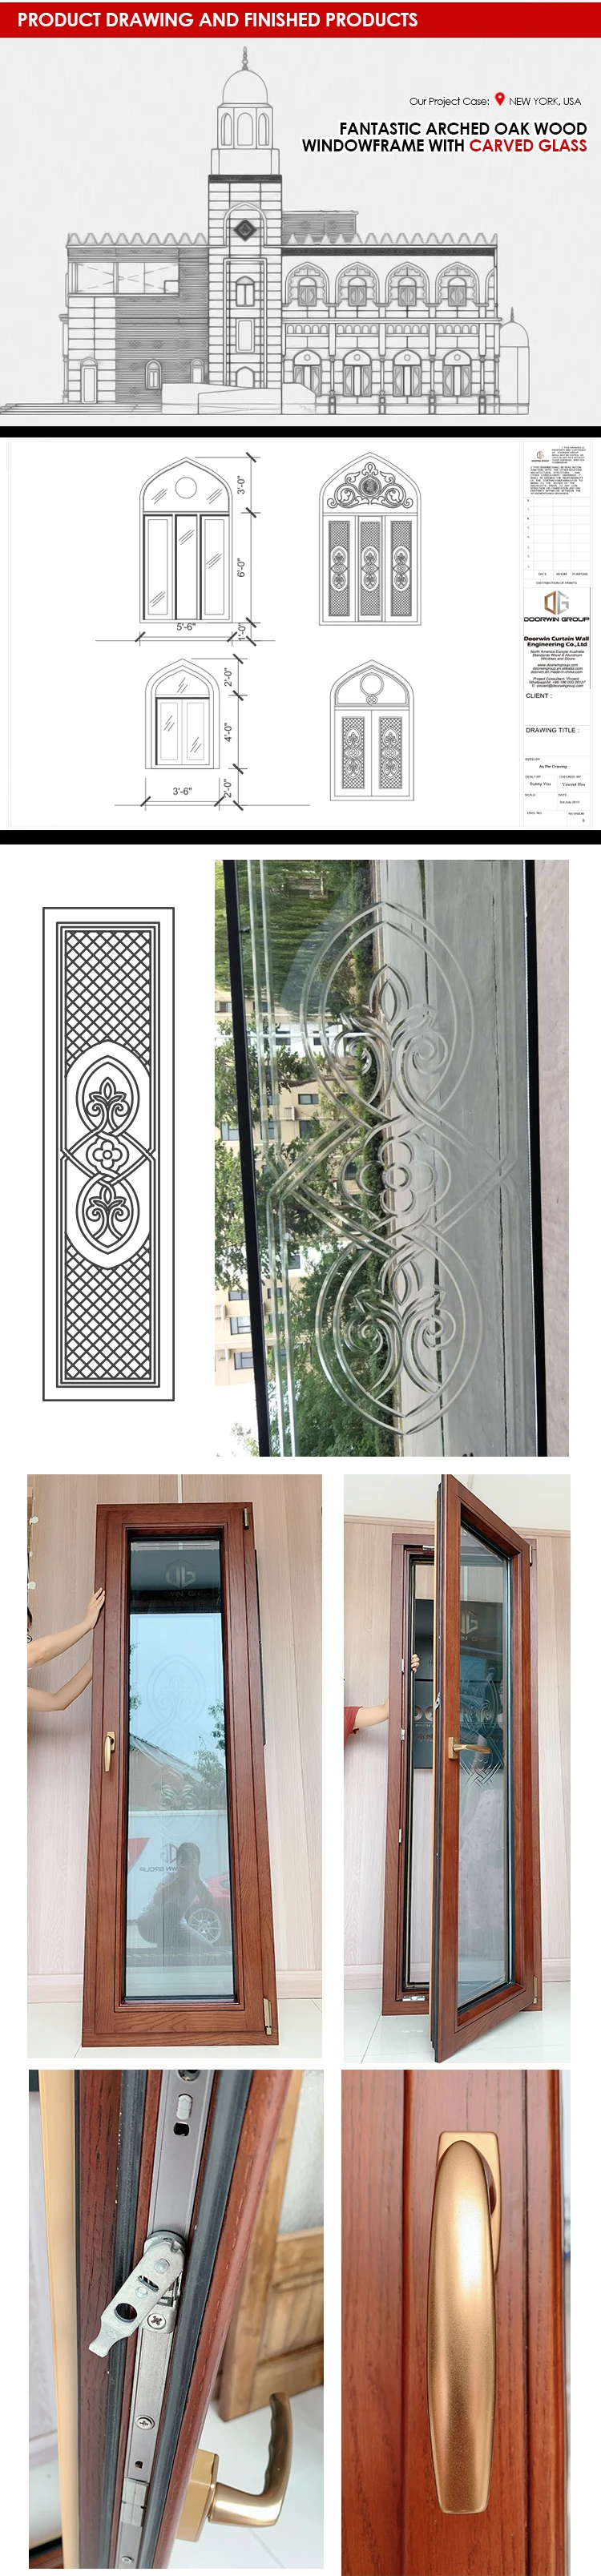 Hot selling residential stained glass windows